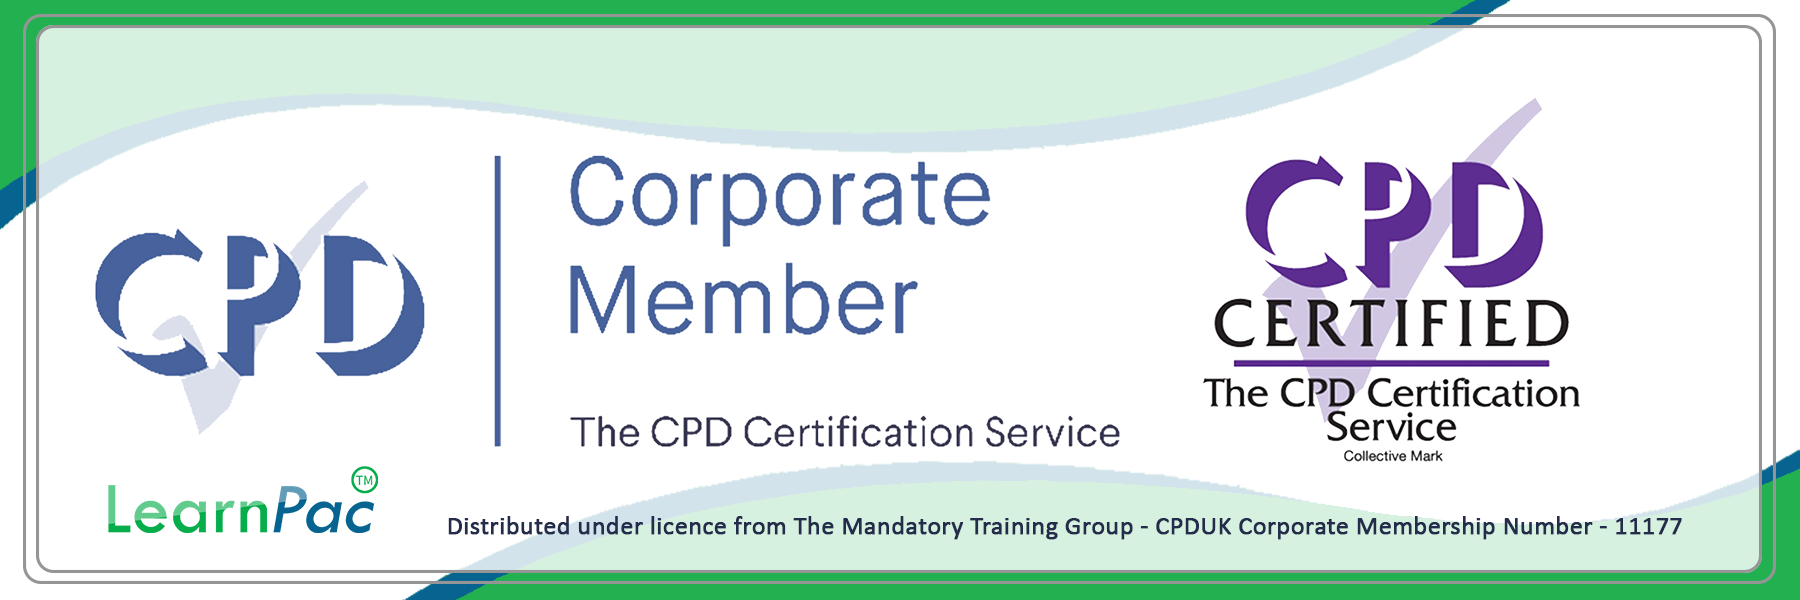 CSTF Non-Clinical Fire Safety - Online Training Course - CPDUK Certified - Learnpac System UK - (2)